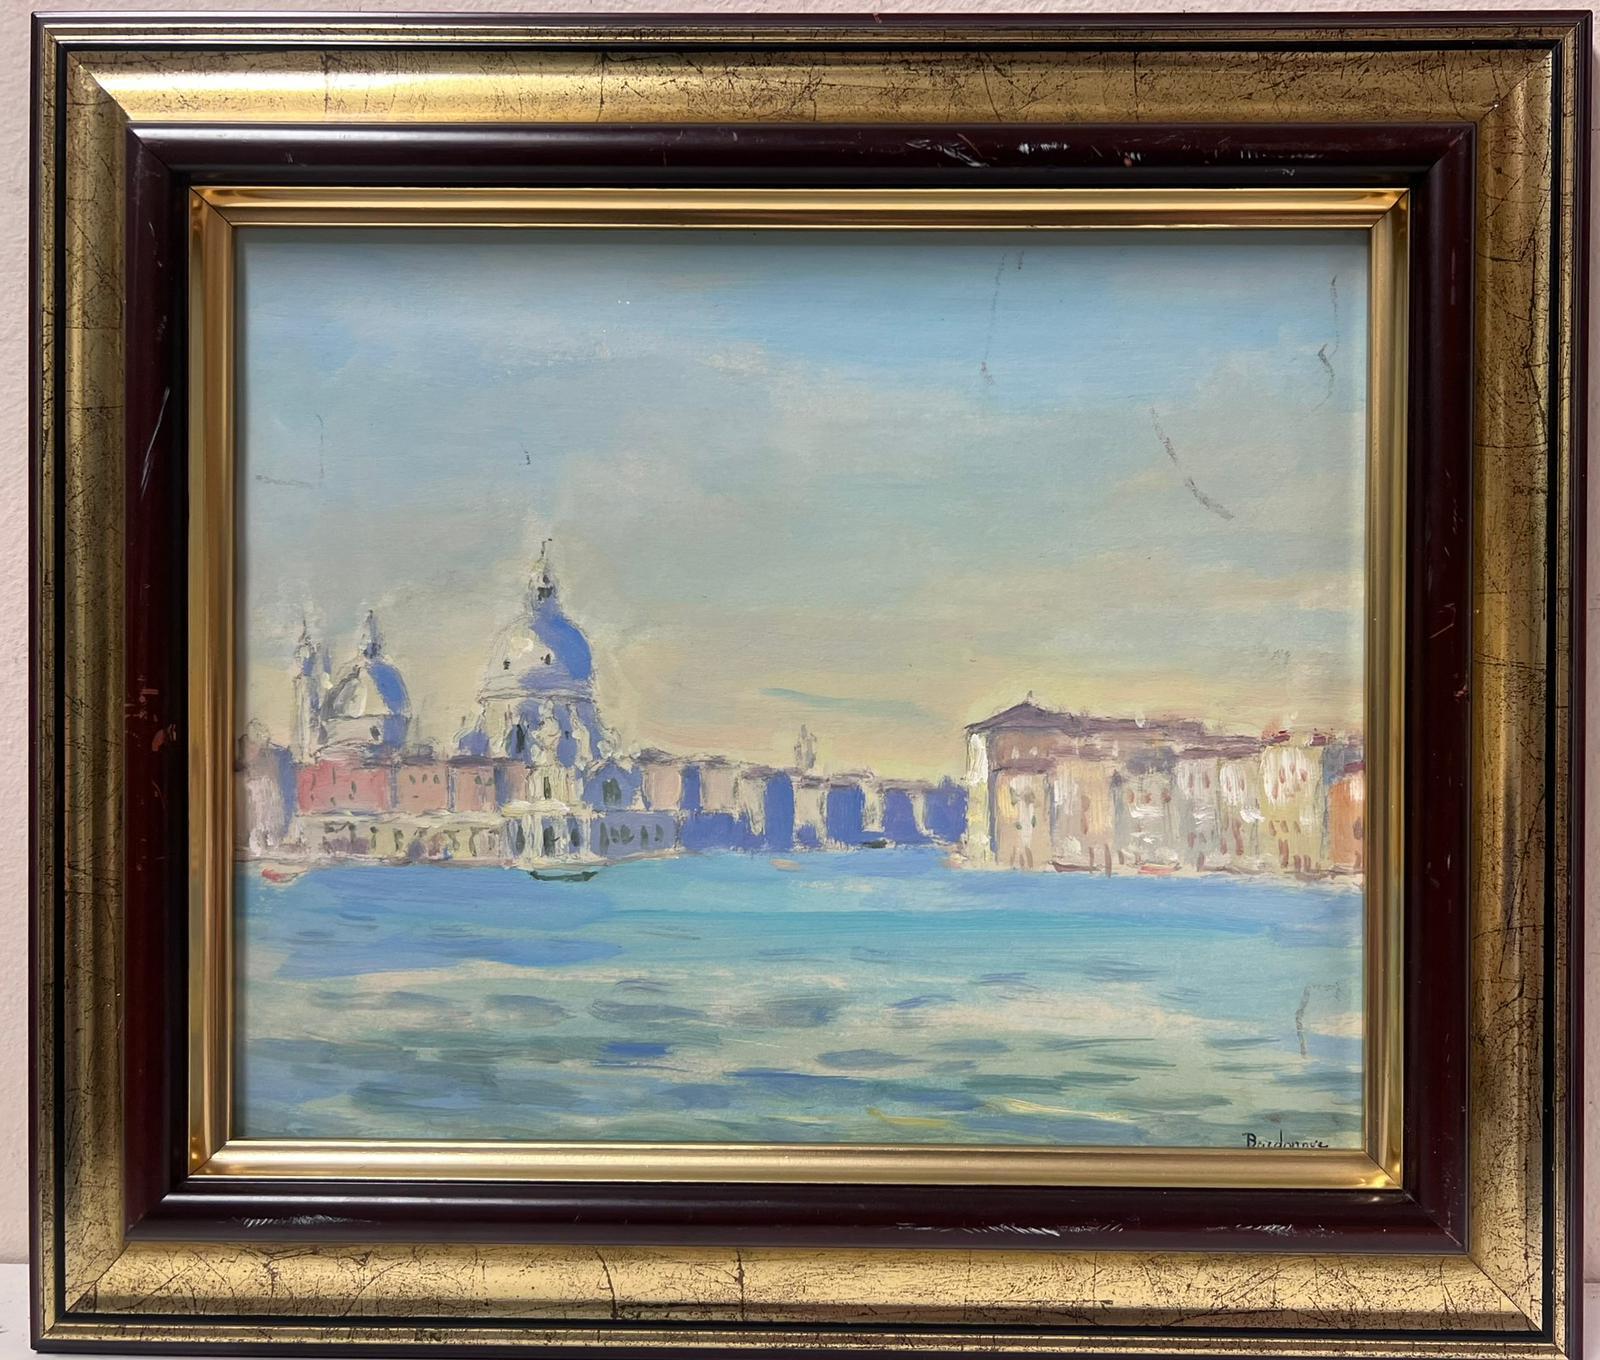 Georges Badanove Landscape Painting - The Grand Canal Venice Bright & Colorful French Impressionist Signed Oil 